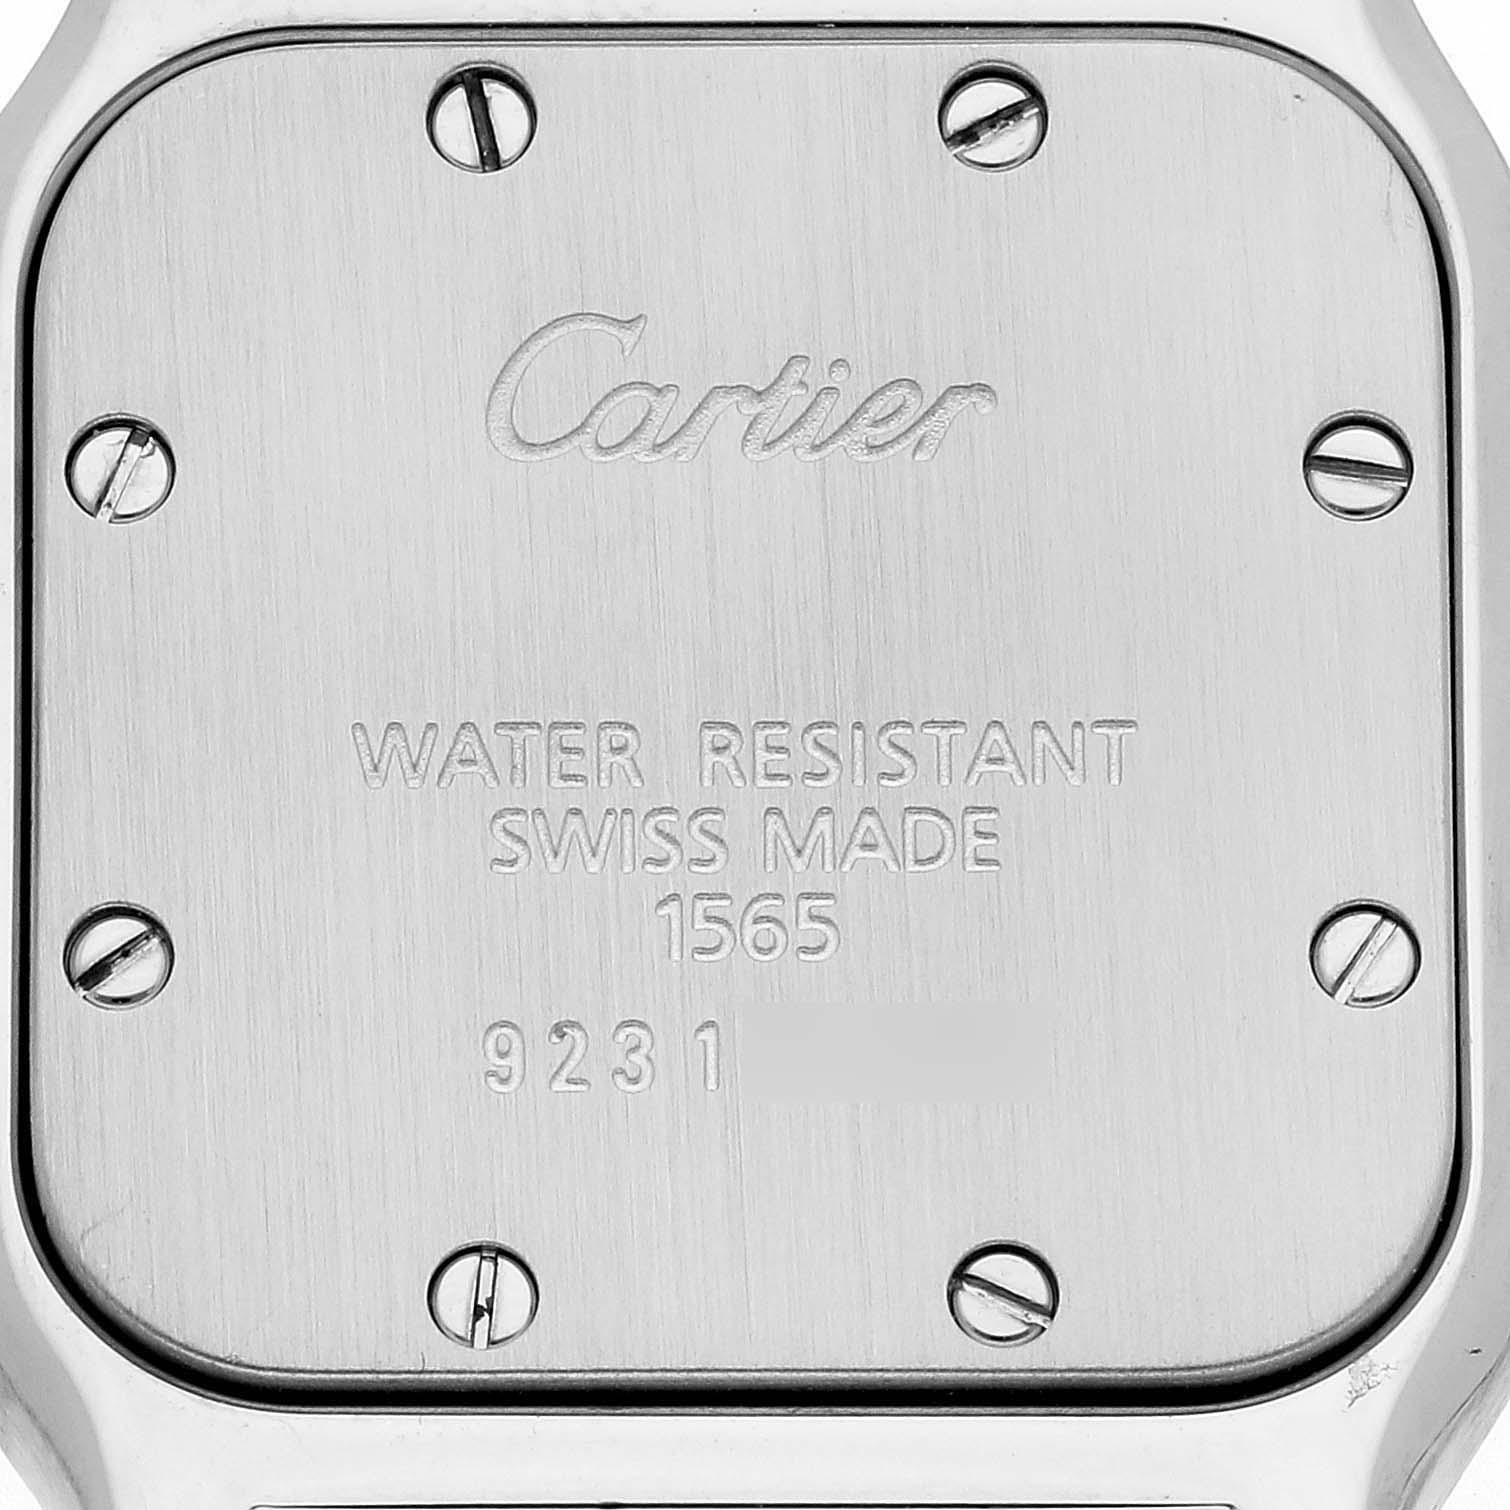 Cartier Santos Galbee Small Silver Dial Steel Ladies Watch W20056D6. Quartz movement. Stainless steel case 24.0 x 34.0 mm. Steel octagonal crown set with a faceted blue spinel cabochon. Stainless steel bezel punctuated with 8 signature screws.